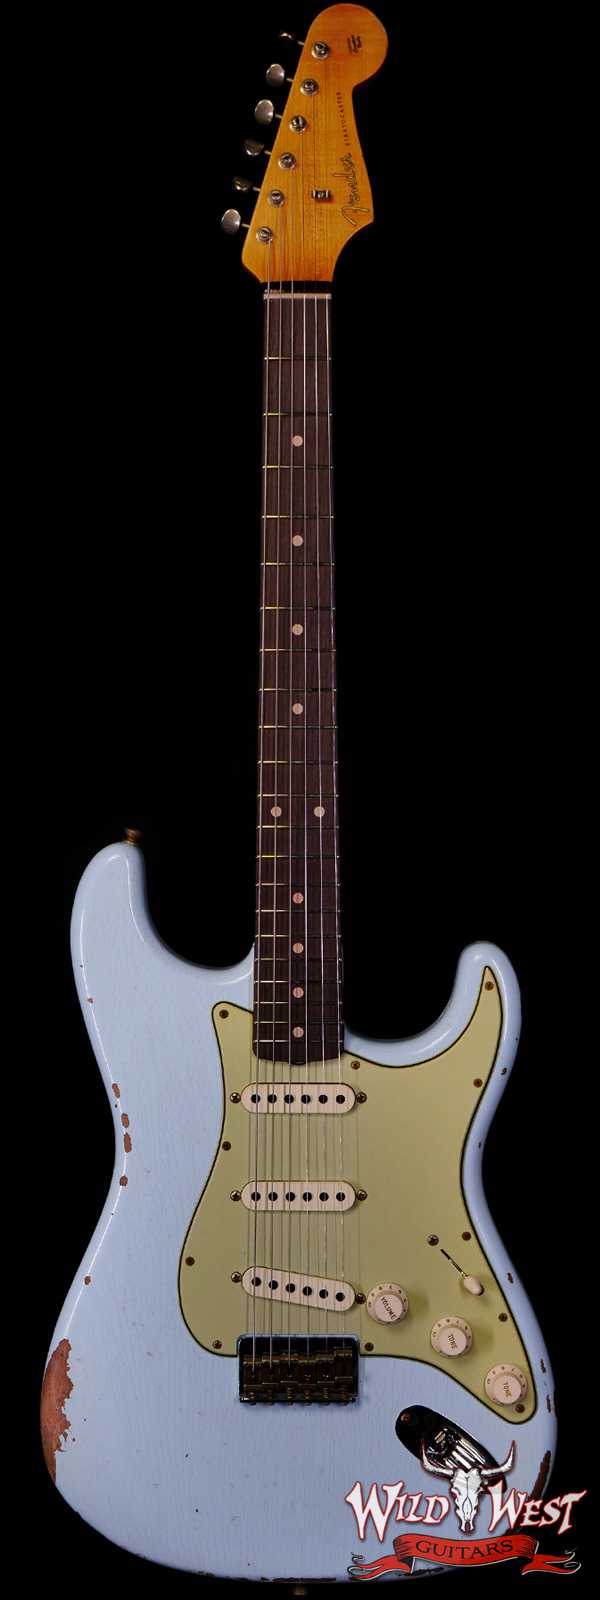 Fender Custom Shop 1962 Stratocaster Hardtail Hand-Wound Pickups AAA Dark Rosewood Slab Board Relic Sonic Blue 7.20 LBS